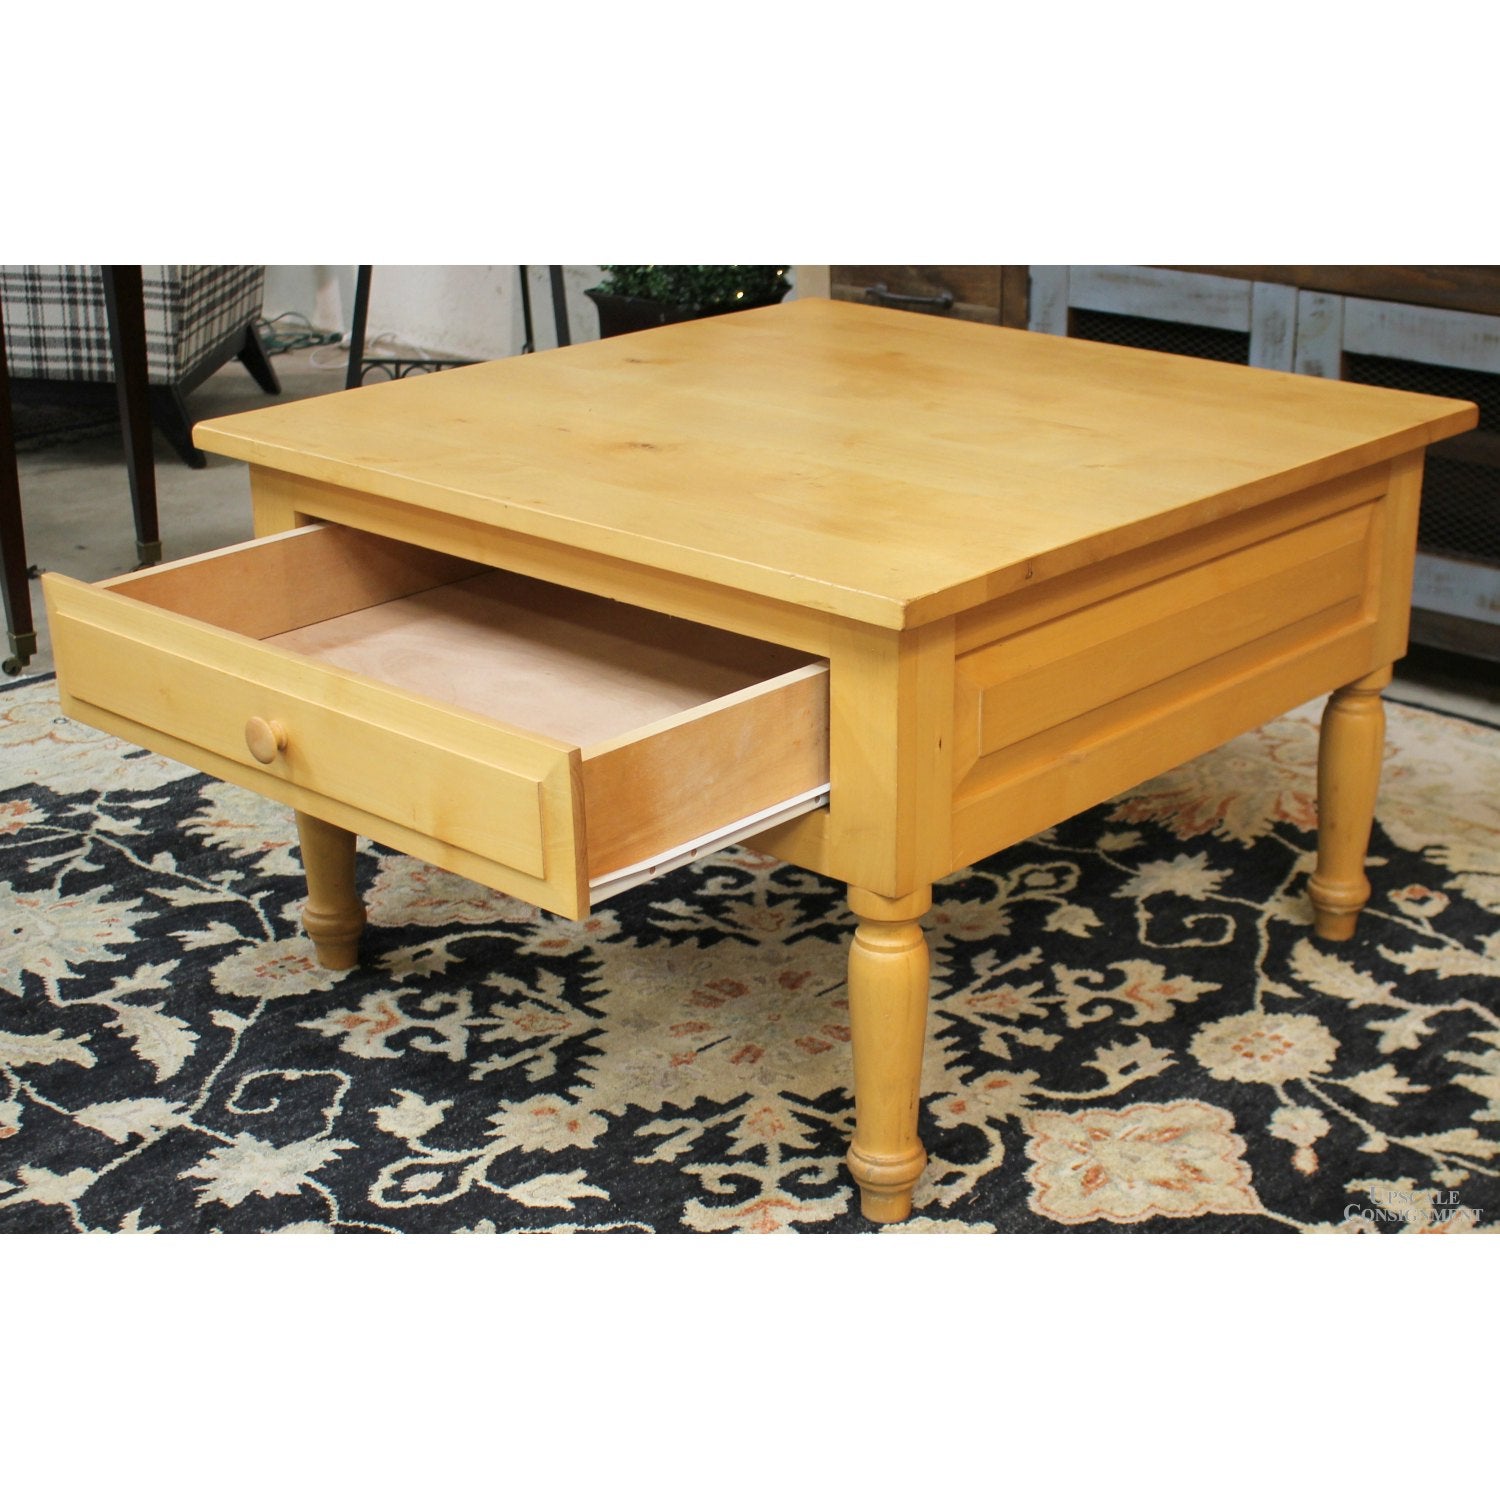 California Made Knotty Rustic Alder Wood Storage End Table with Drawer in  Rustic Coffee Finish, ODC Products